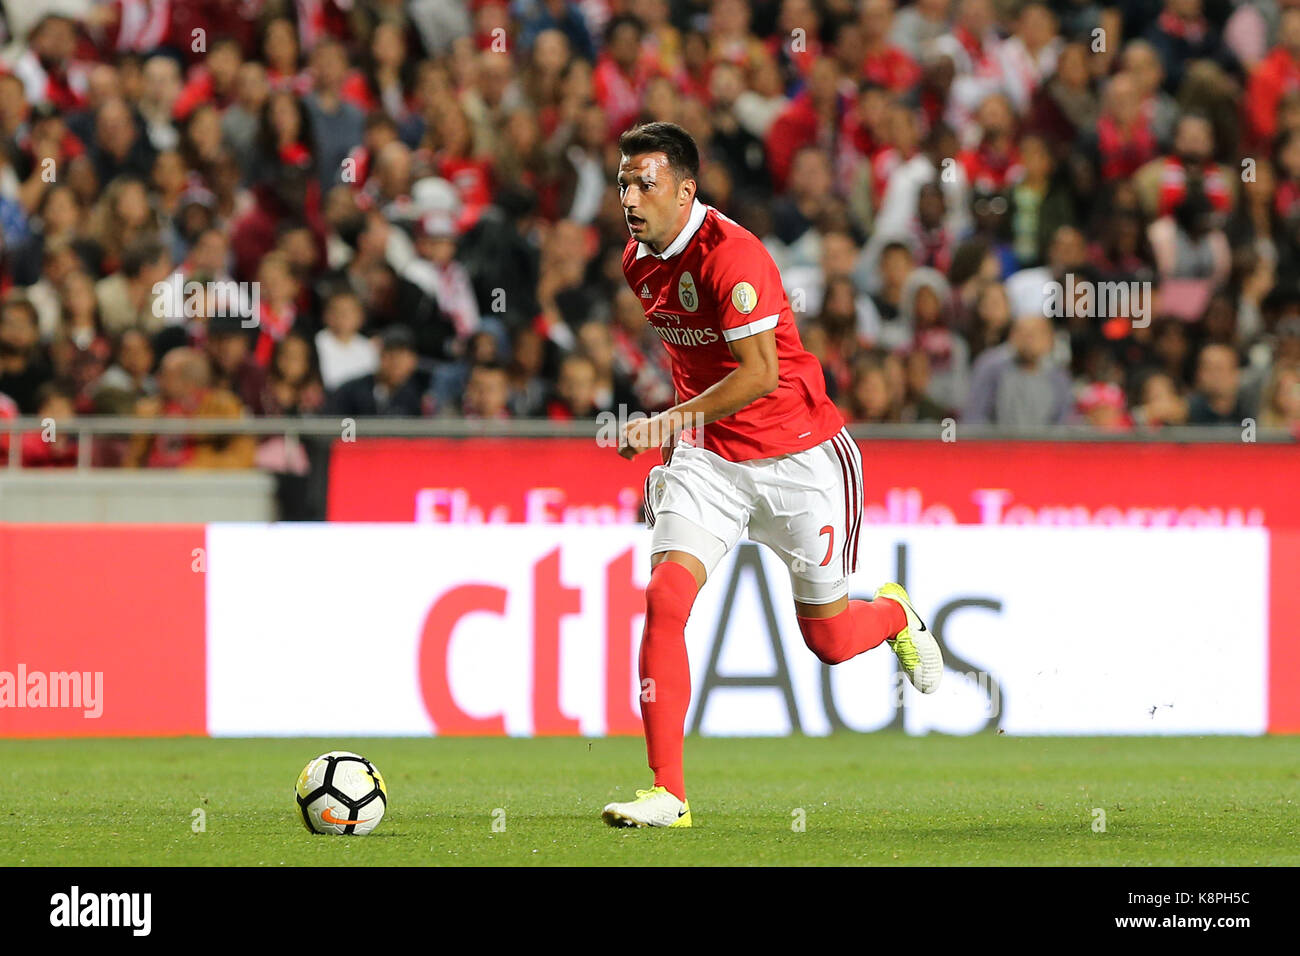 Lisbon, Portugal. 20th Sep, 2017. Benfica's midfielder Andreas Samaris from Greece during the Portuguese Cup 2017/18 match between SL Benfica v SC Braga, at Luz Stadium in Lisbon on September 20, 2017. Credit: Bruno Barros/Alamy Live News Stock Photo